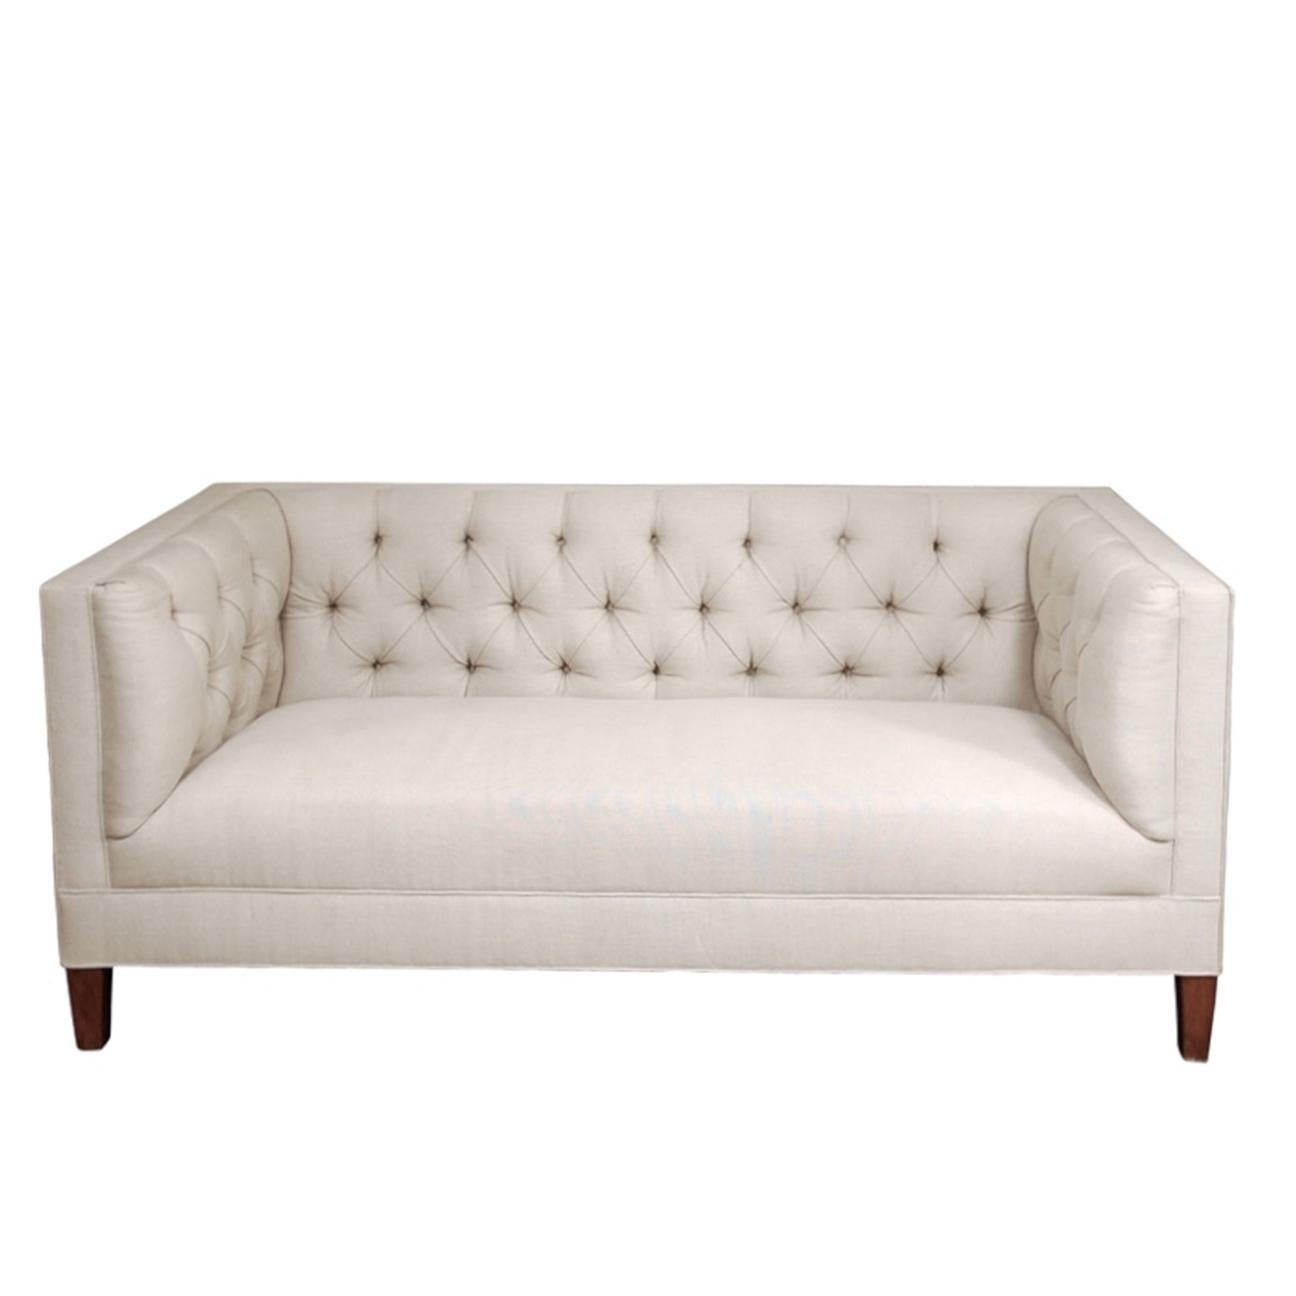 "Tatum" by Lee Stanton William IV Style Tufted Sofa For Sale